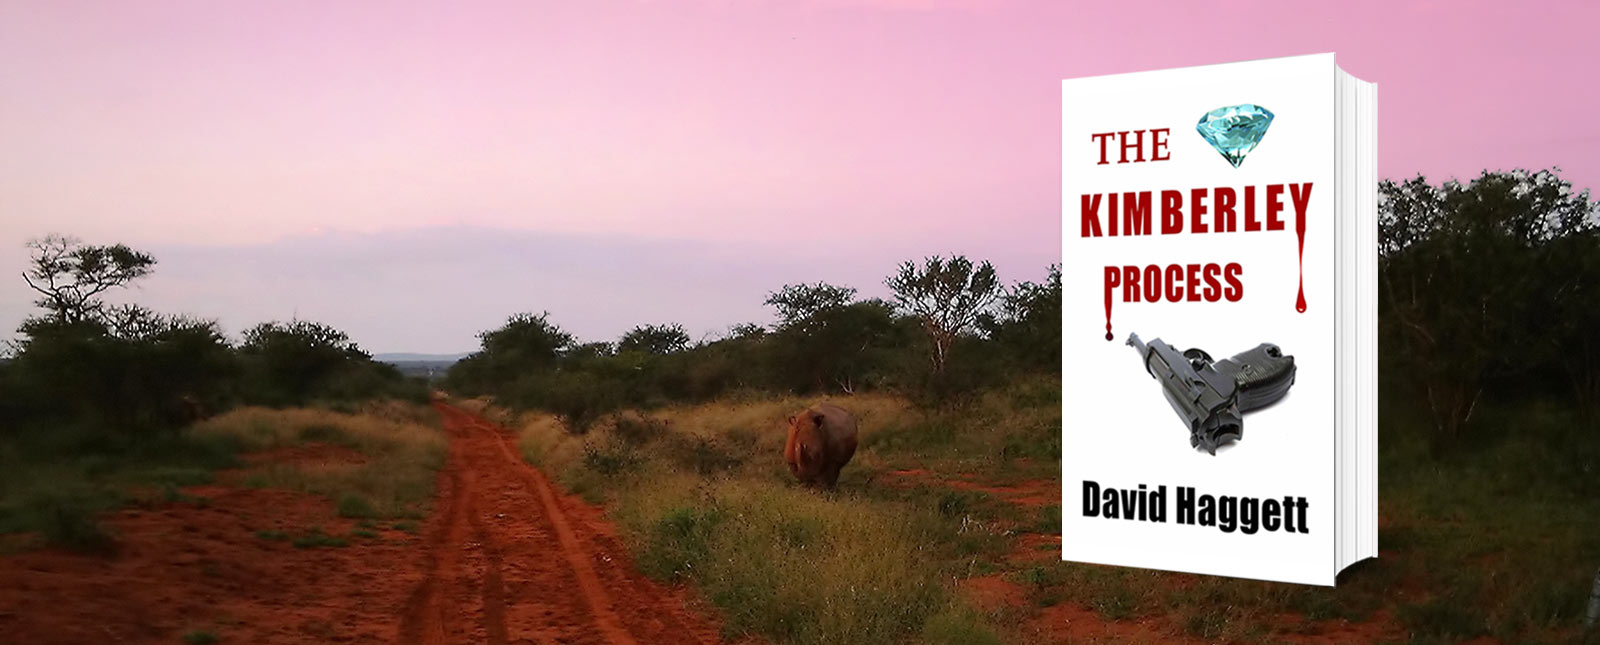 The new novel by David Haggett shown against a sunset and a rhino!